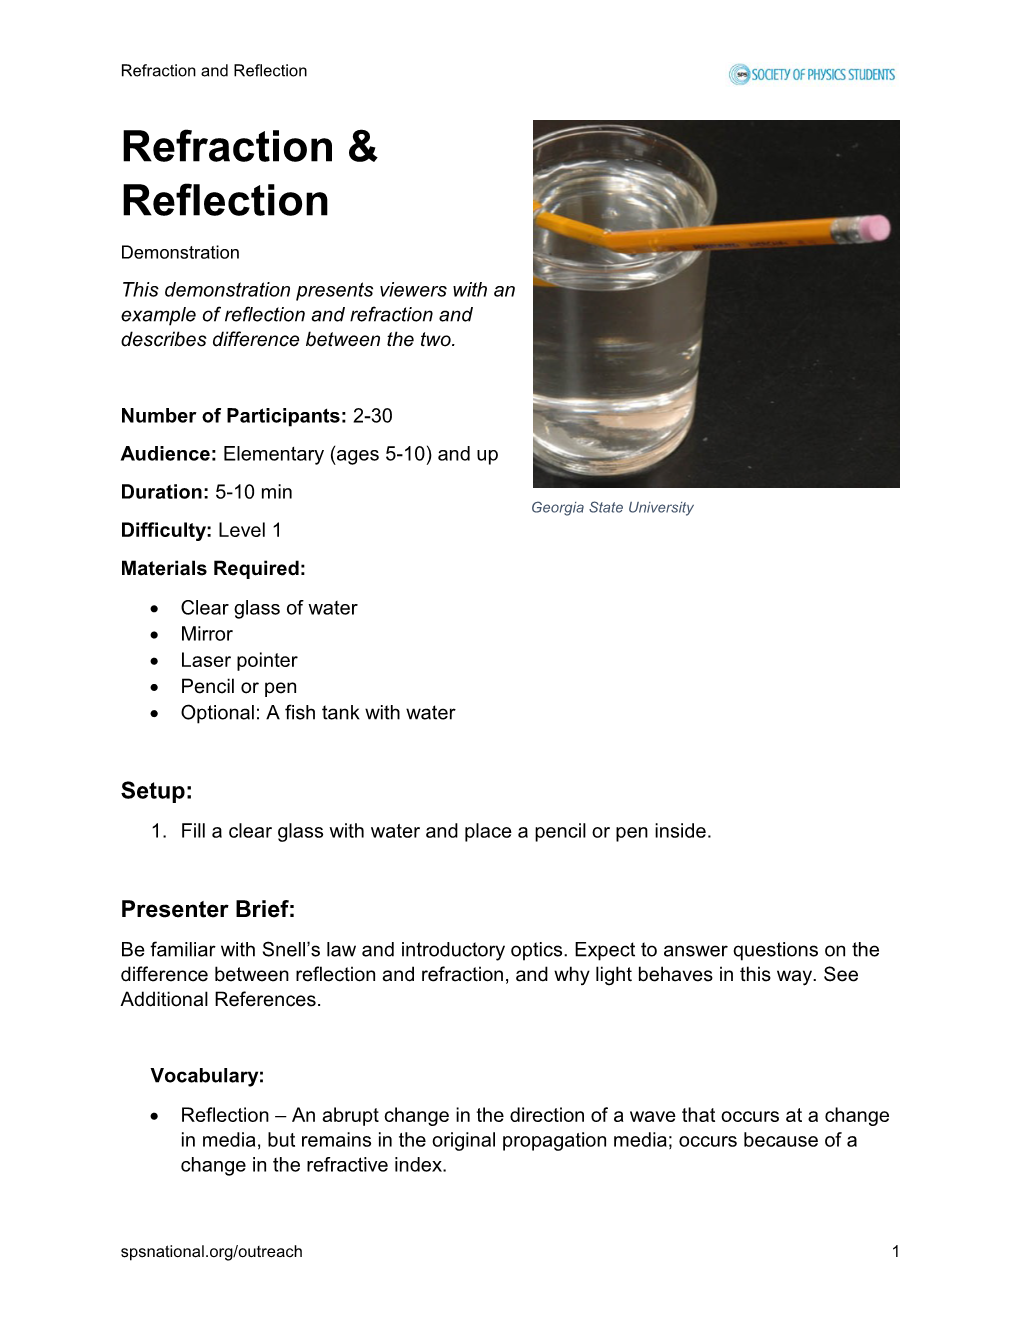 Refraction & Reflection